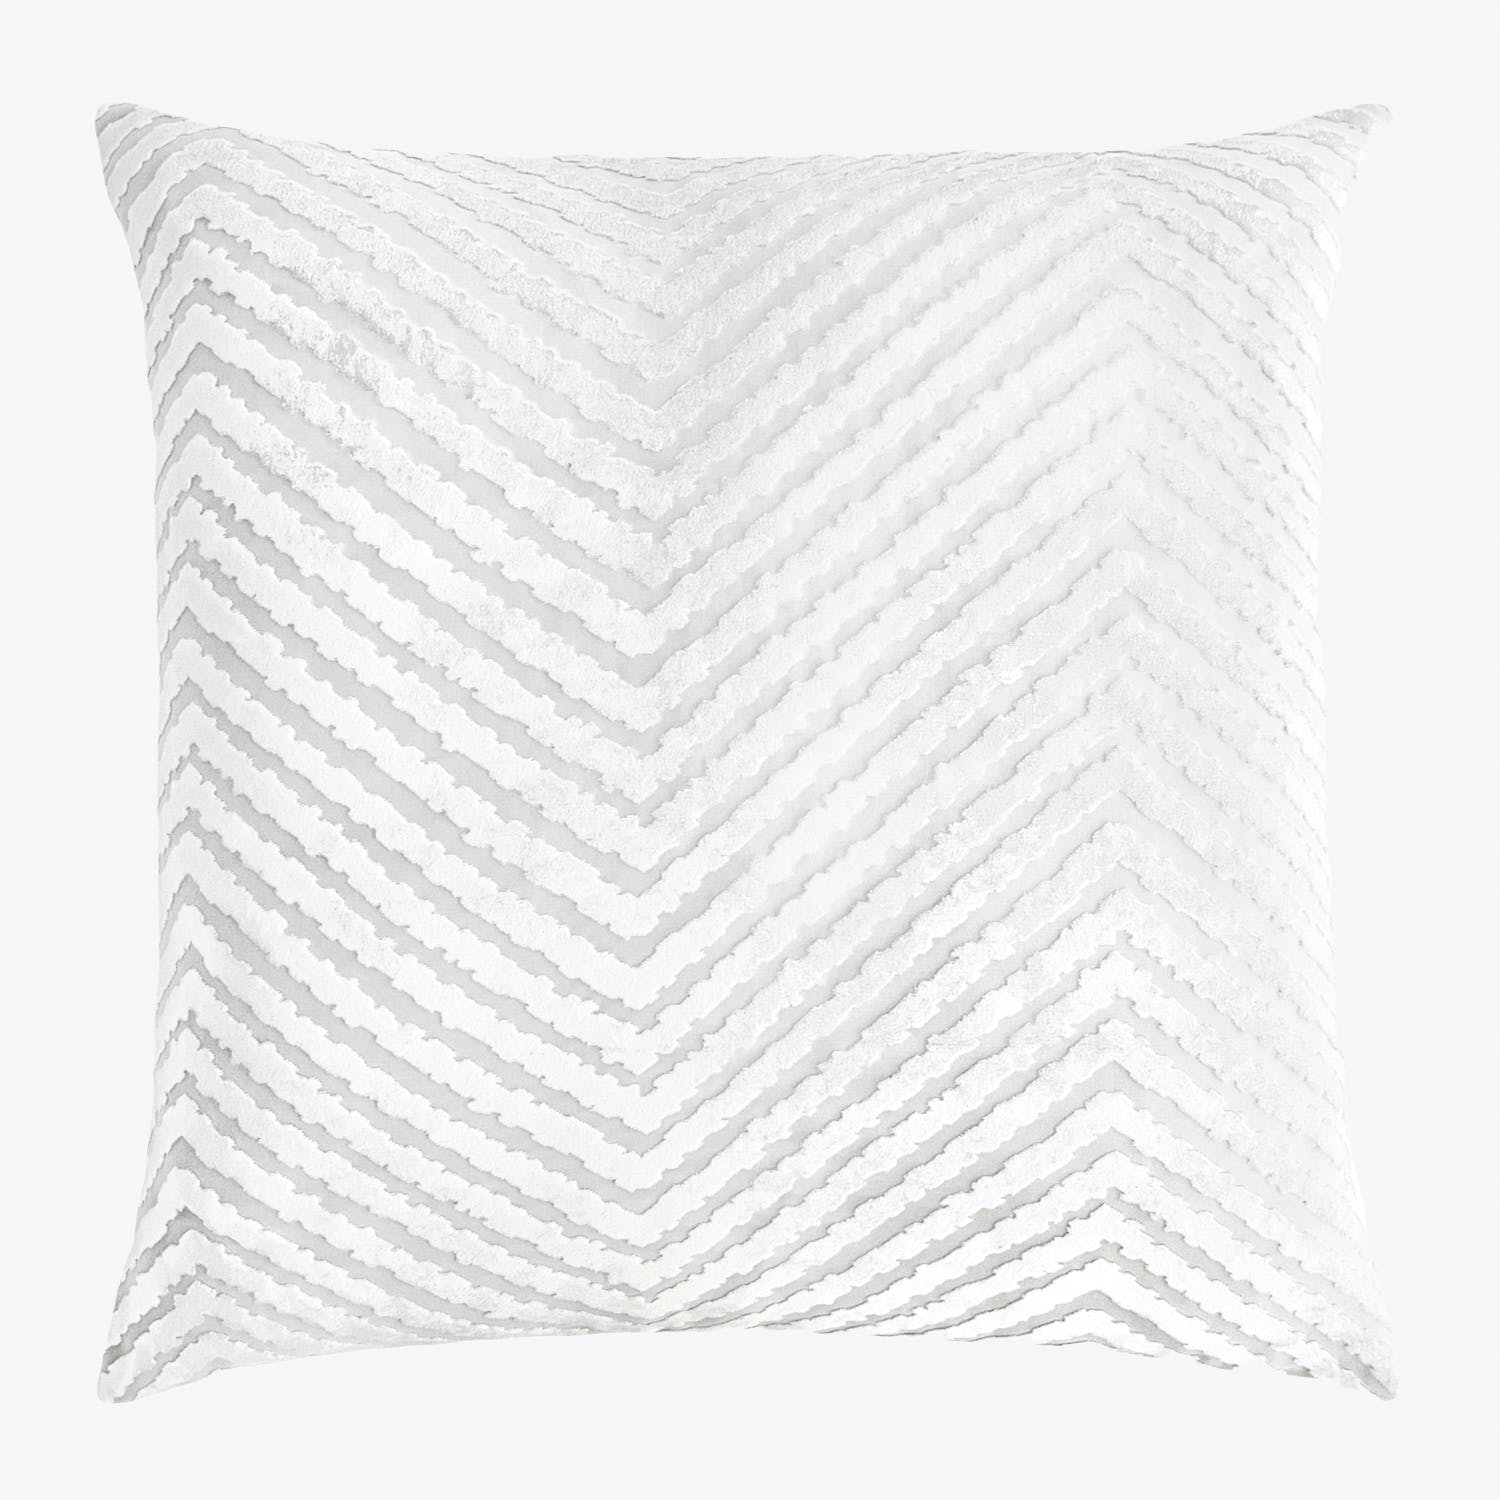 Square decorative pillow with chevron pattern adds depth to decor.